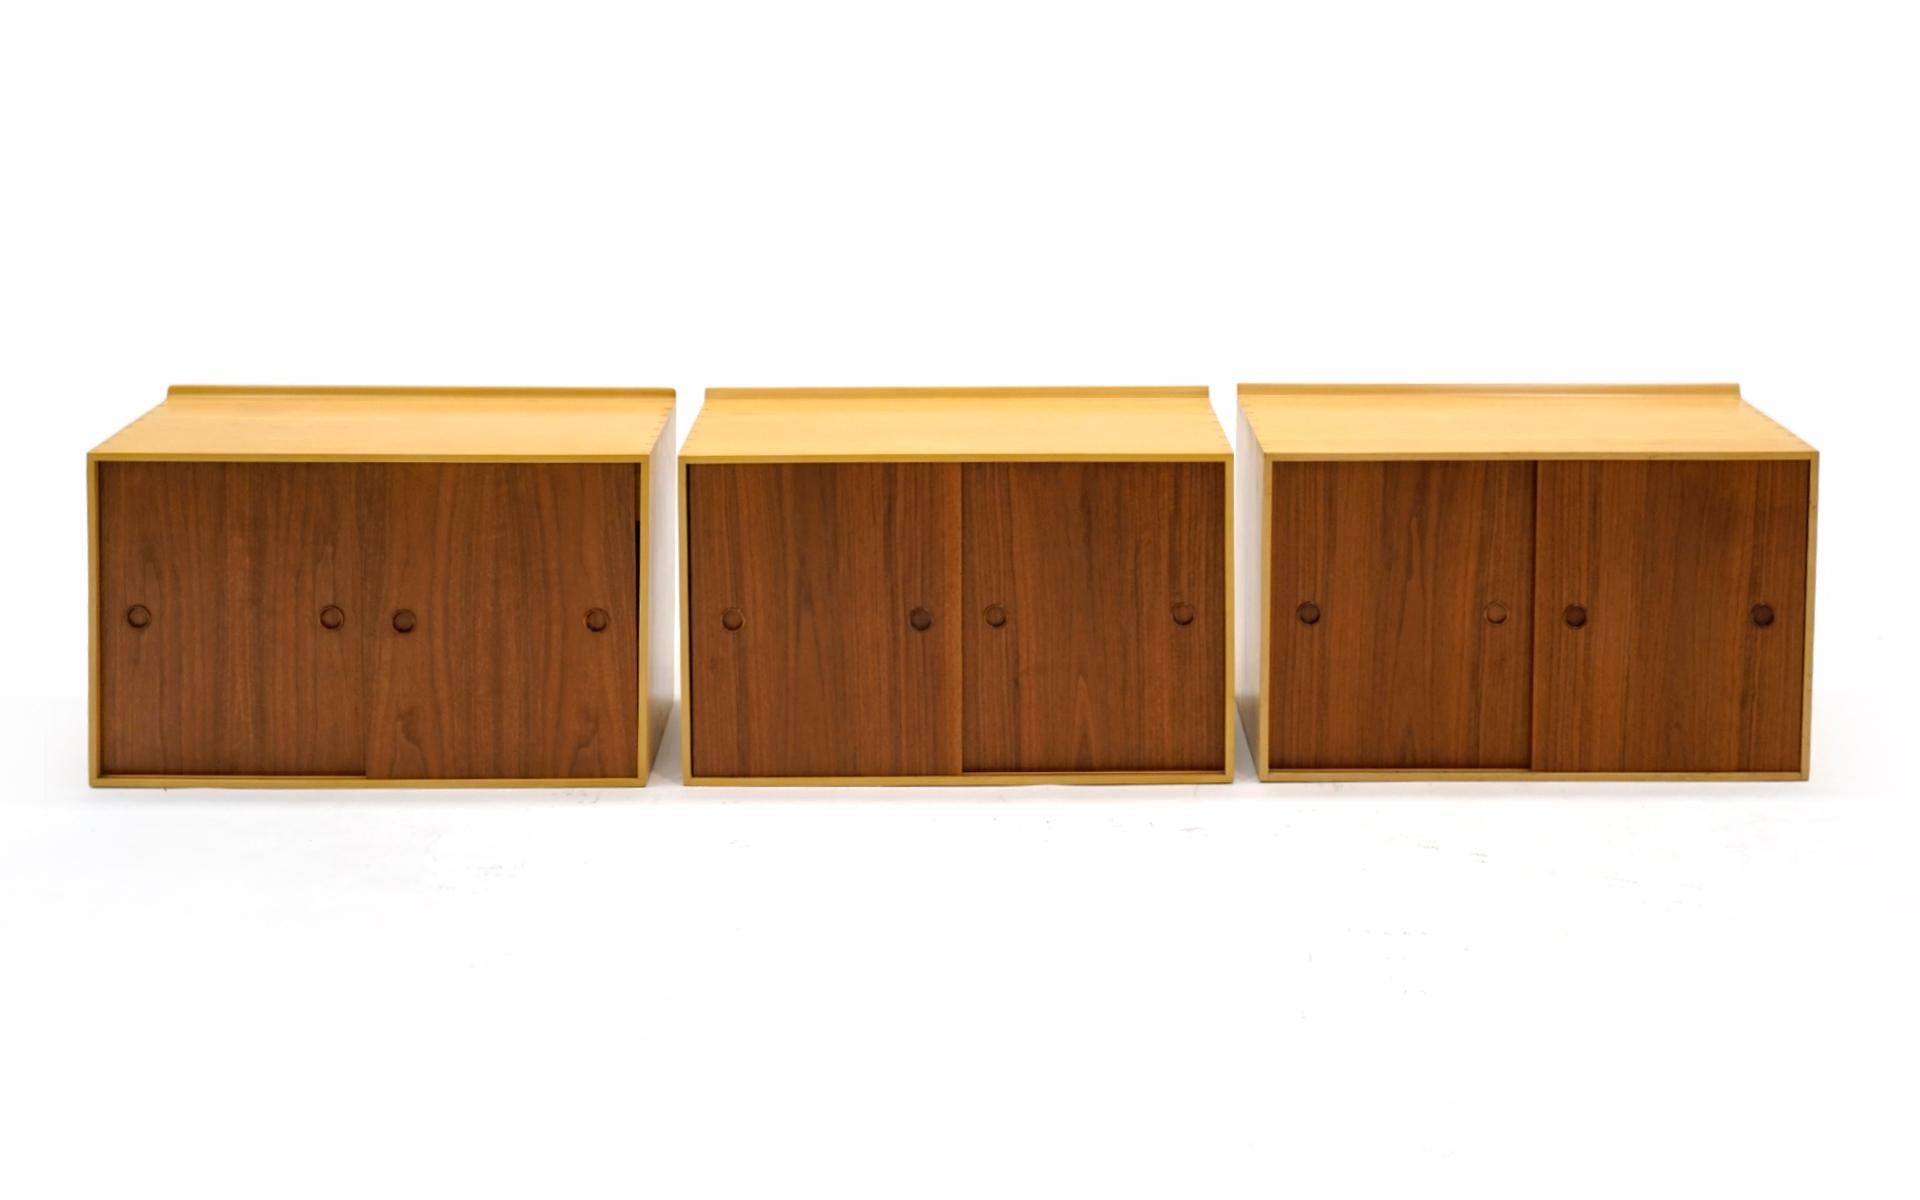 Set of six wall mount cabinets / wall unit designed by Finn Juhl and manufactured by Baker, 1950s. The entire set is in very good condition, Beautiful grain pattern in the walnut door fronts making for a striking contrast with the birch cases. Each